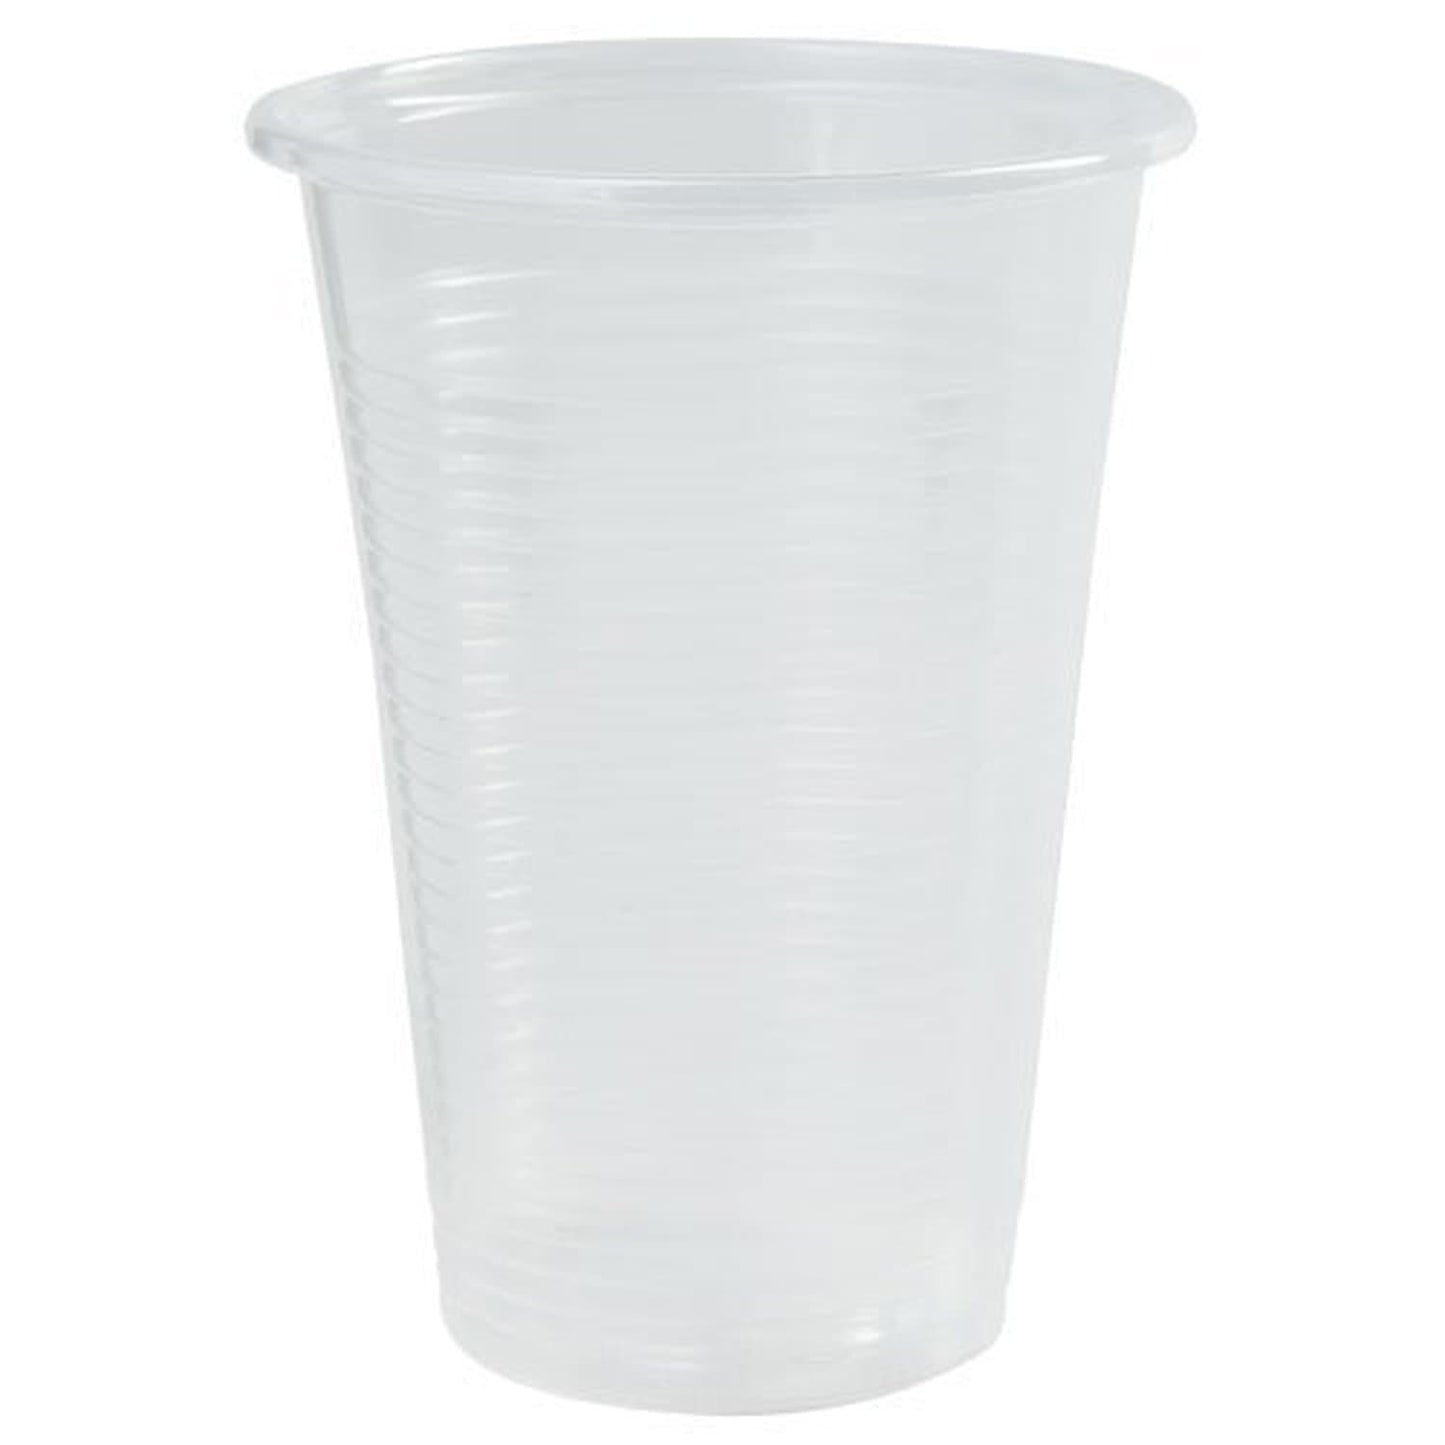 https://onlyonestopshop.com/cdn/shop/products/Nicole-Home-Collection-Everyday-Transparent-Plastic-Cup-9-oz-Nicole-Collection-1603926120.jpg?v=1603926121&width=1445